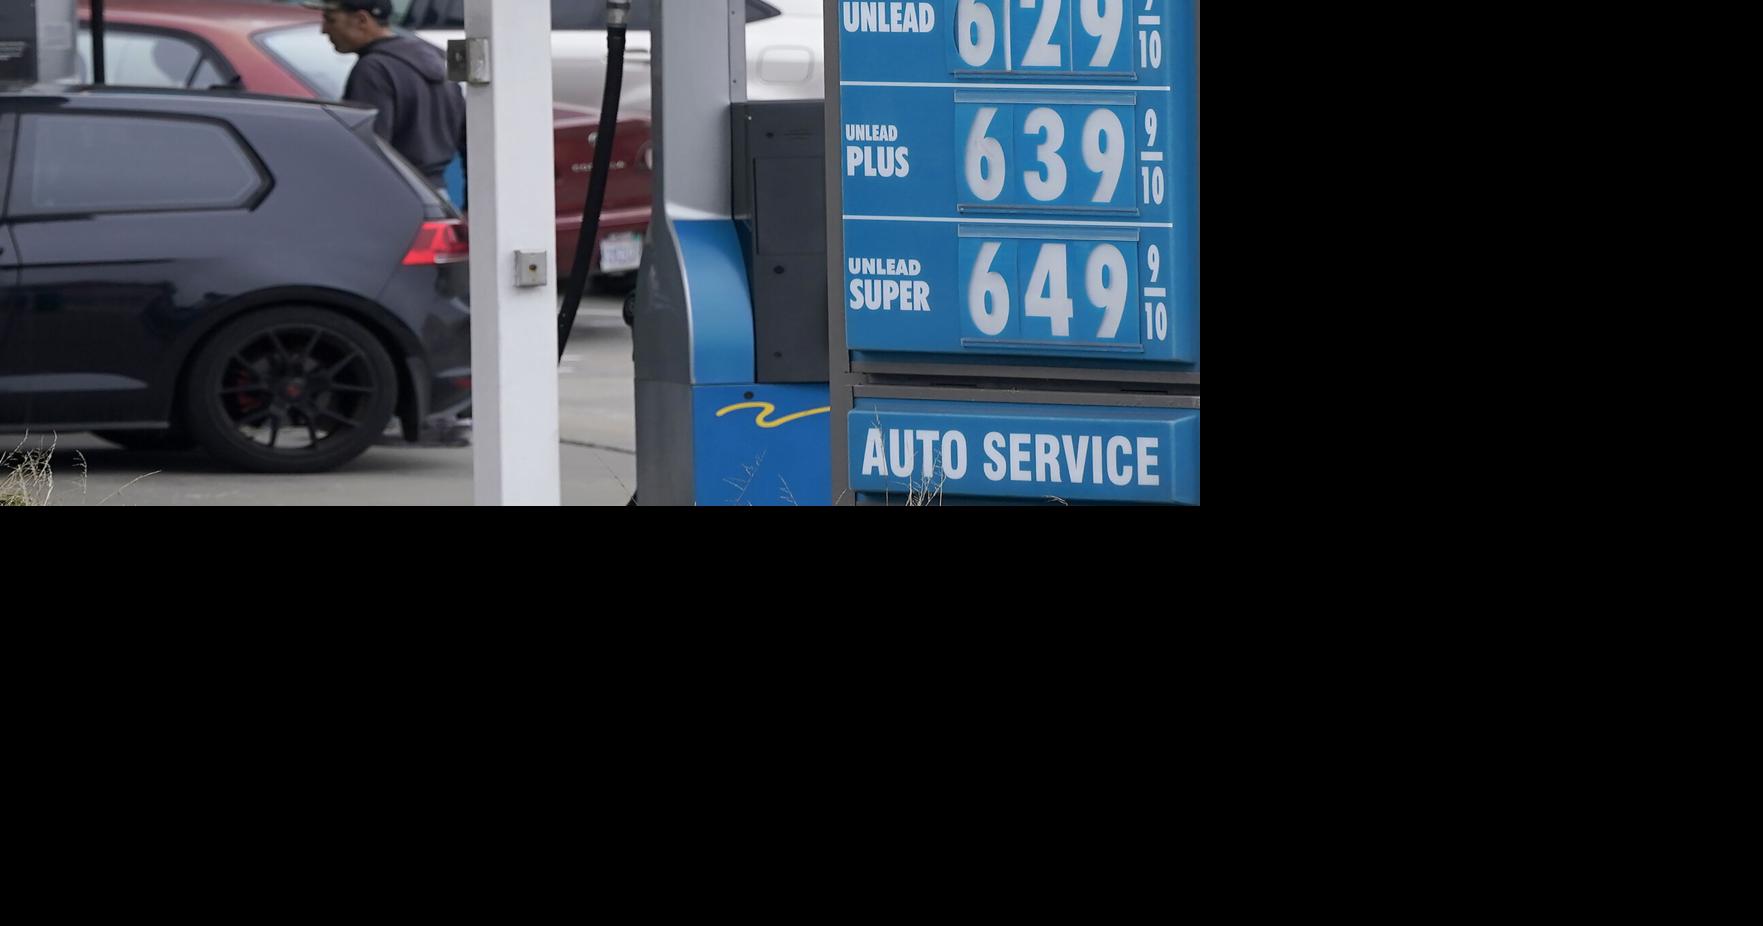 Gas prices fall in California, but residents still pay highest prices nationwide